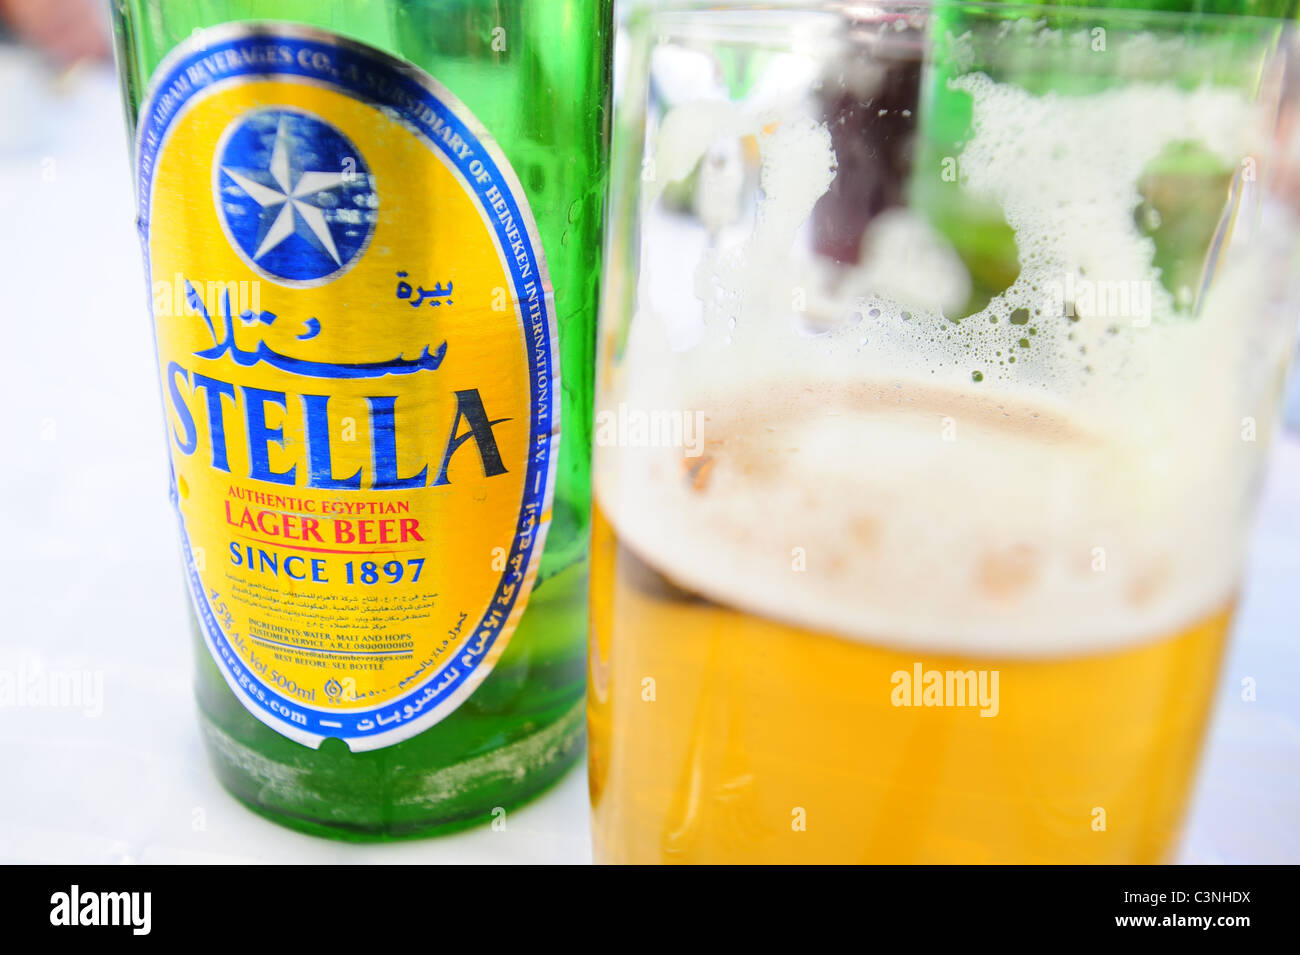 Africa Middle East Egypt alcohol beer Stella lager beer Stock Photo